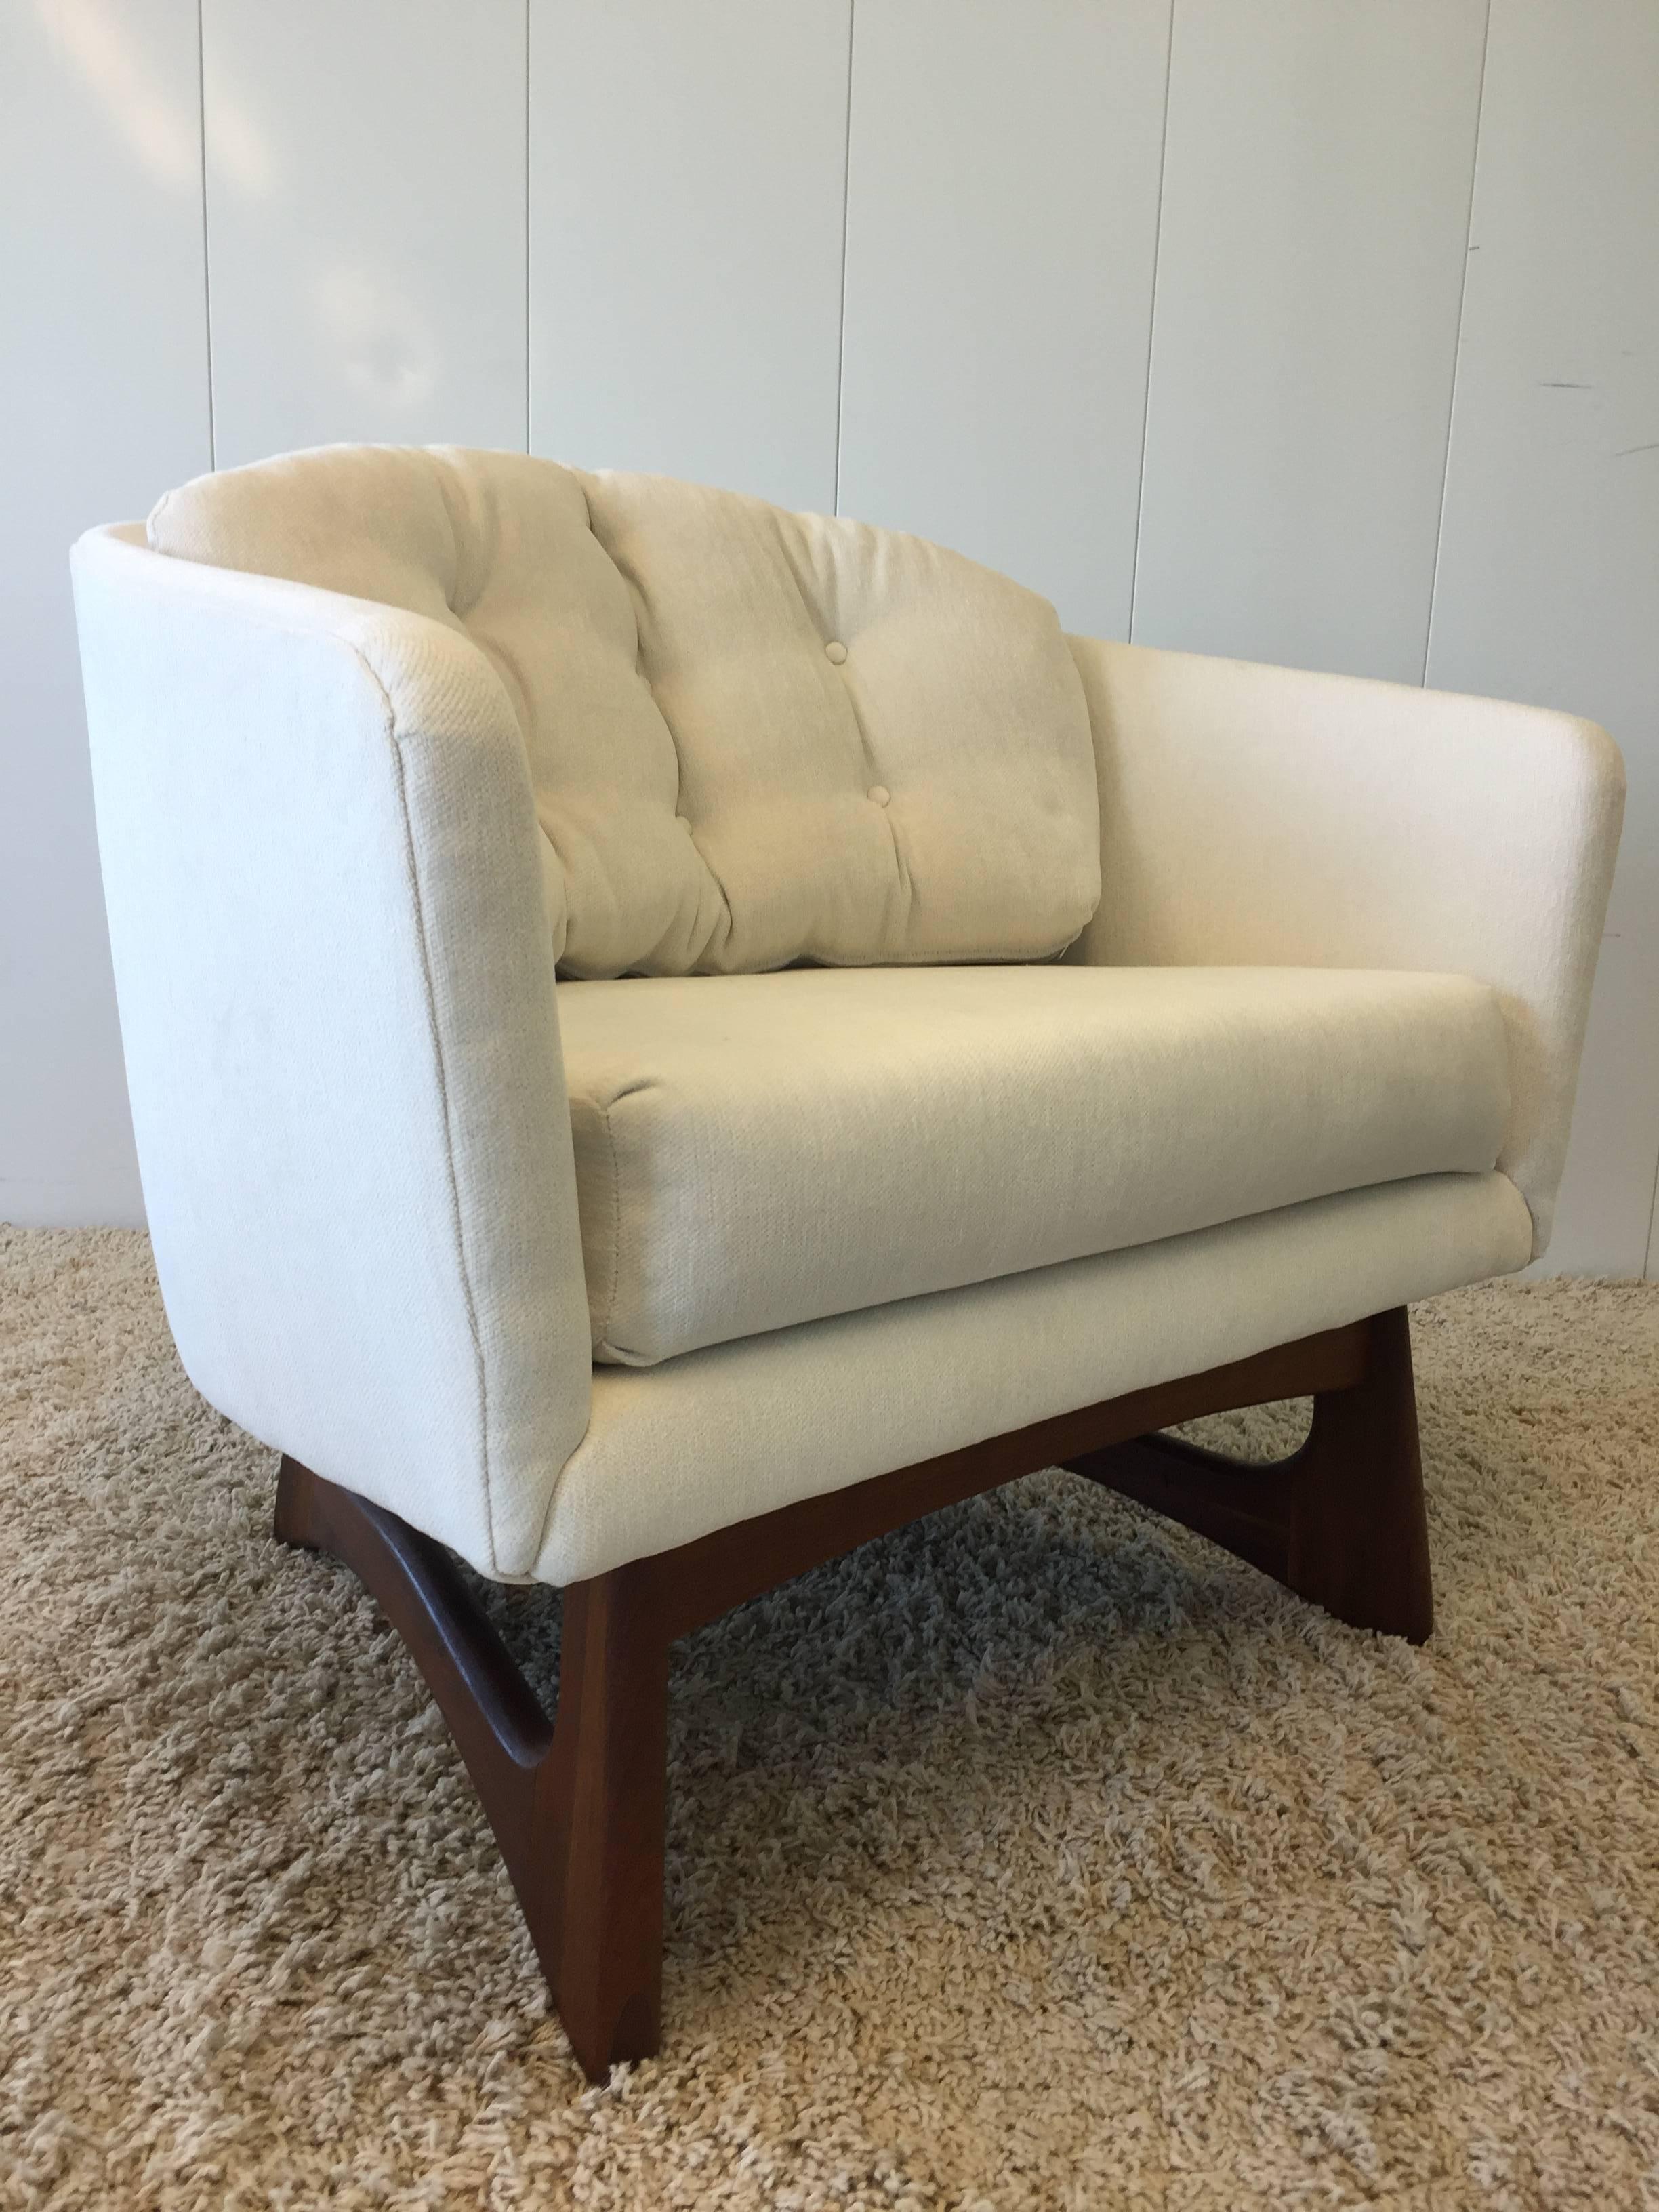 Pair of Adrian Pearsall club chairs for Craft Associates in a off white chenille fabric and tufted back cushion. Wonderful designed walnut base.